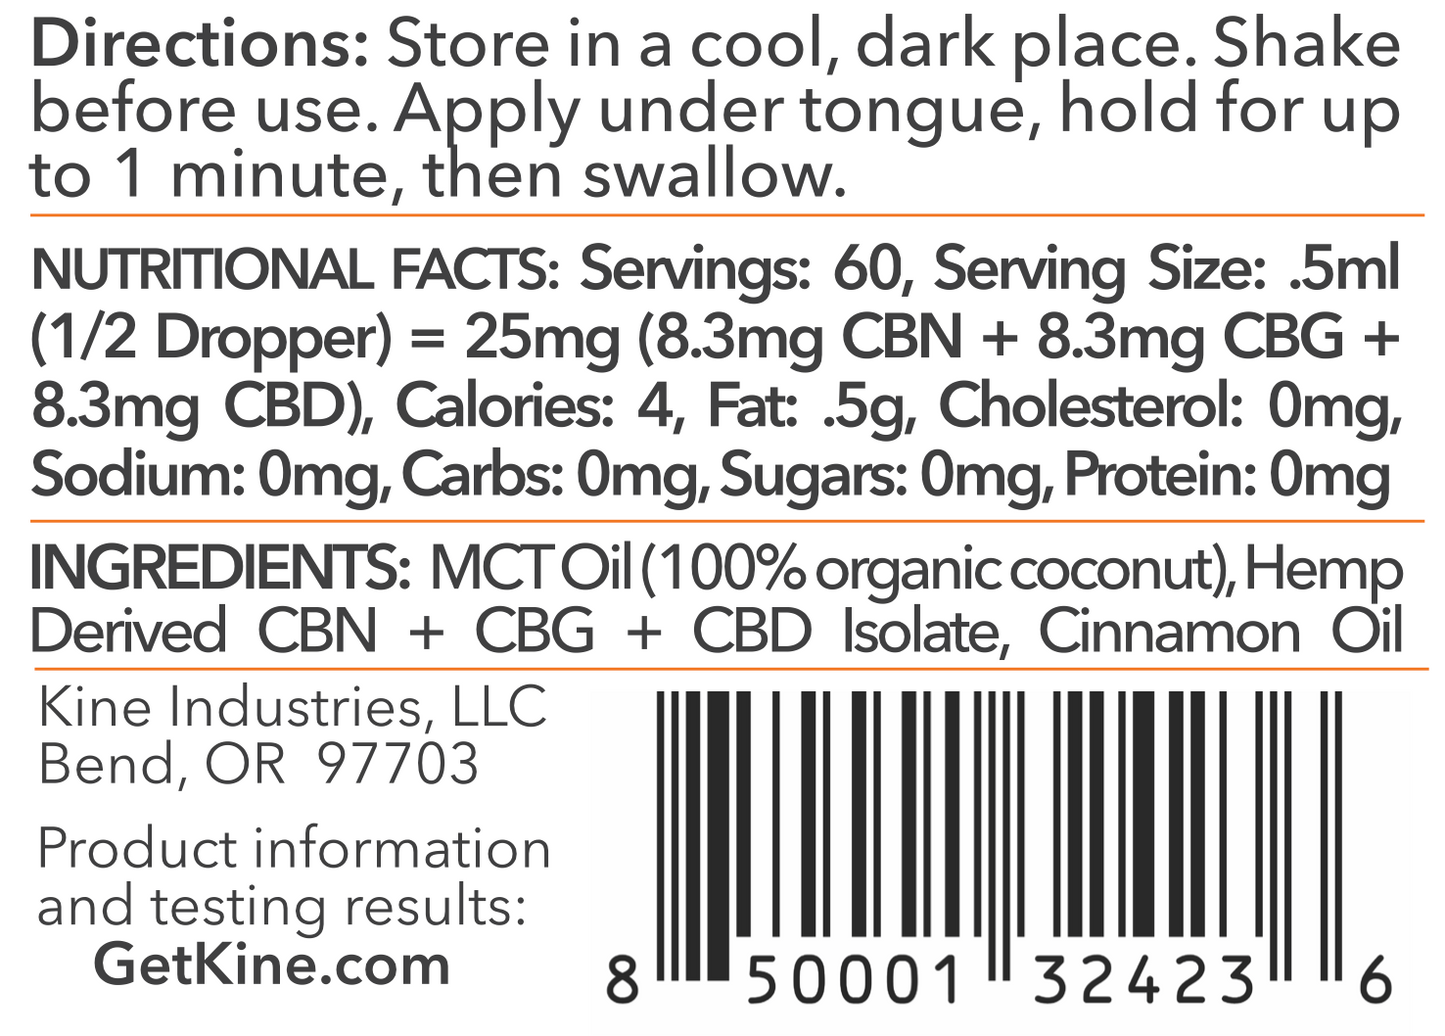 Kine Red Hot Cinnamon Flavored Organic CBN/CBG/CBD 1:1:1 ratio 1500mg tincture drops ingredients list and nutritional facts